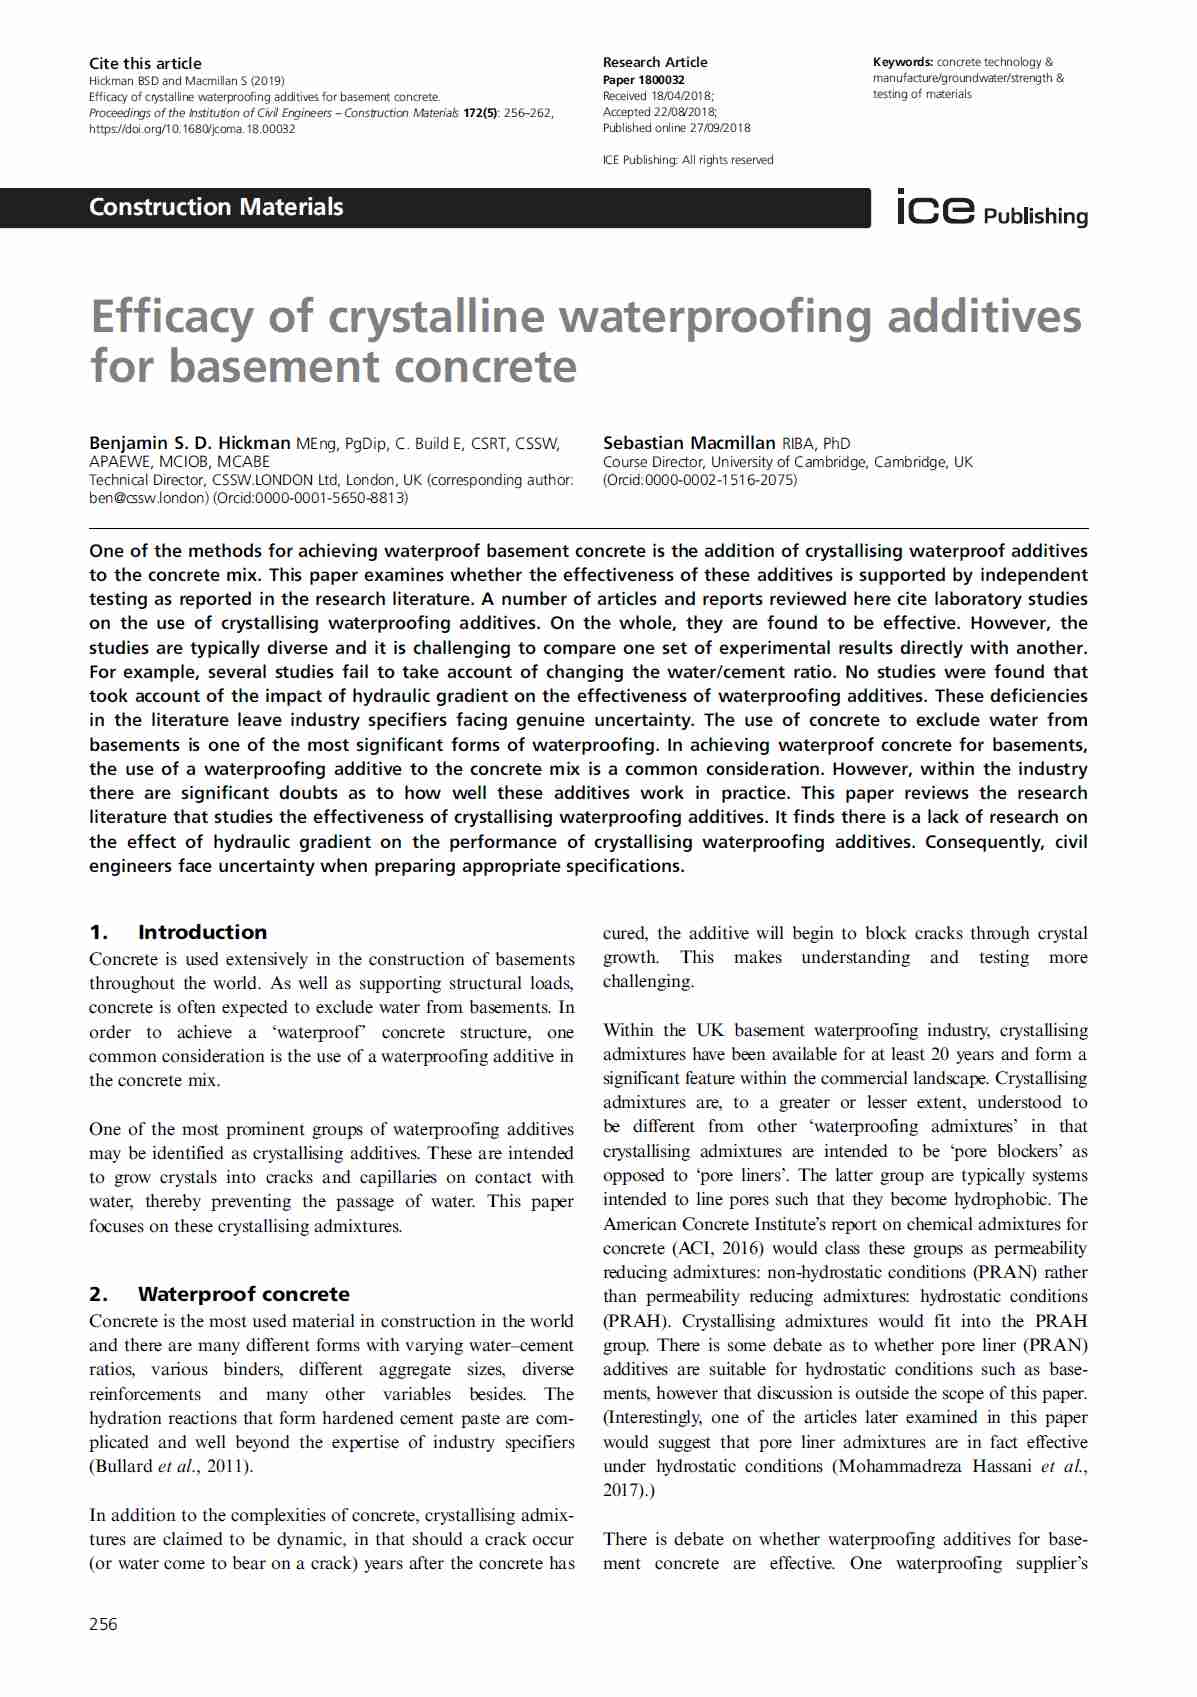 Publication Image efficacy-waterproofing-additives